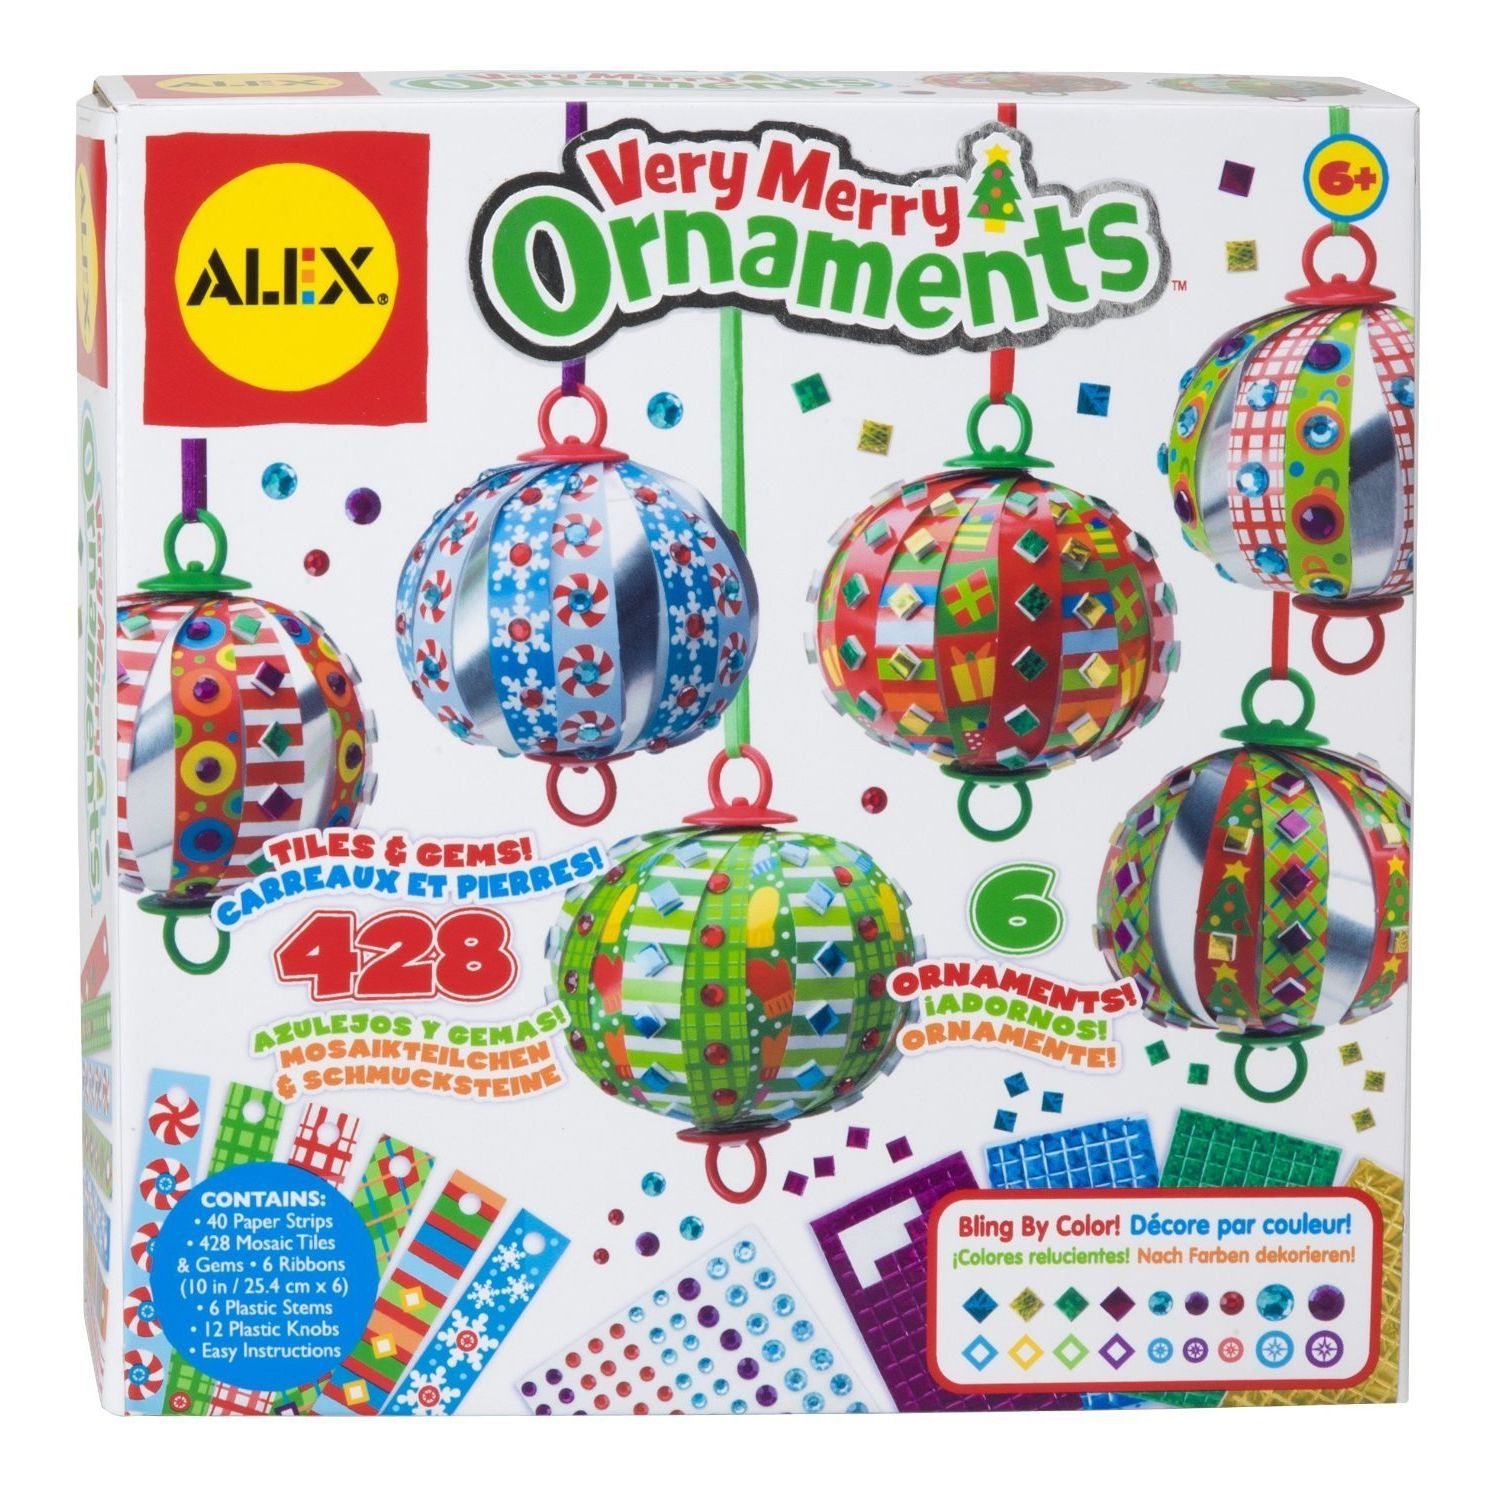 ALEX Toys Craft Very Merry Ornaments Kit Only $7.60 on Amazon!